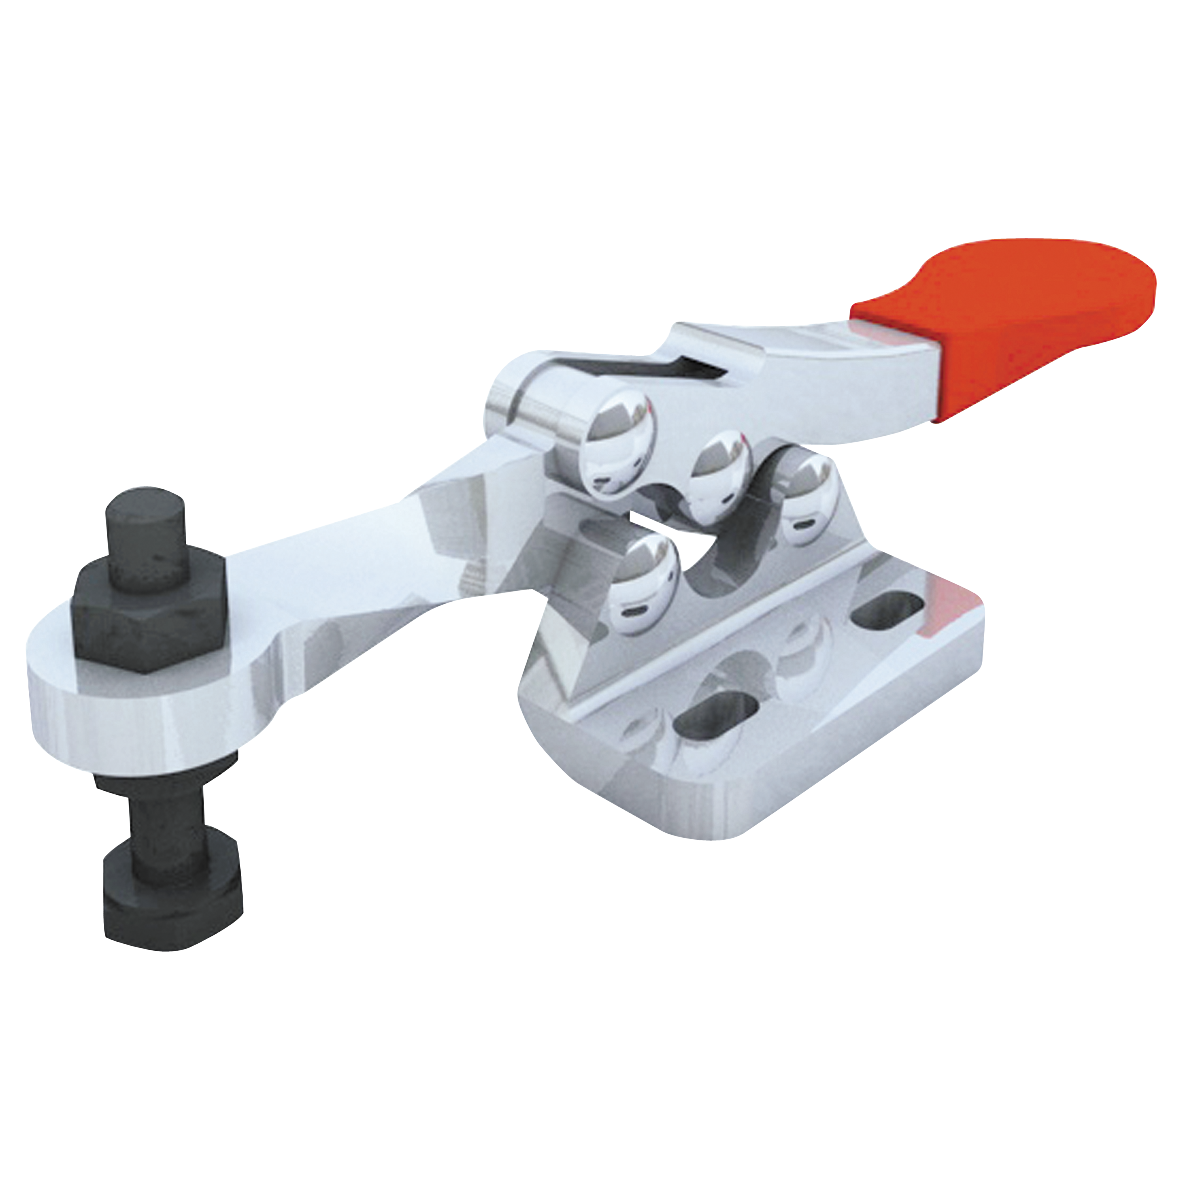 GH-201 Toggle Clamp Quick Release Hand Tool Holding Capacity TEUS 